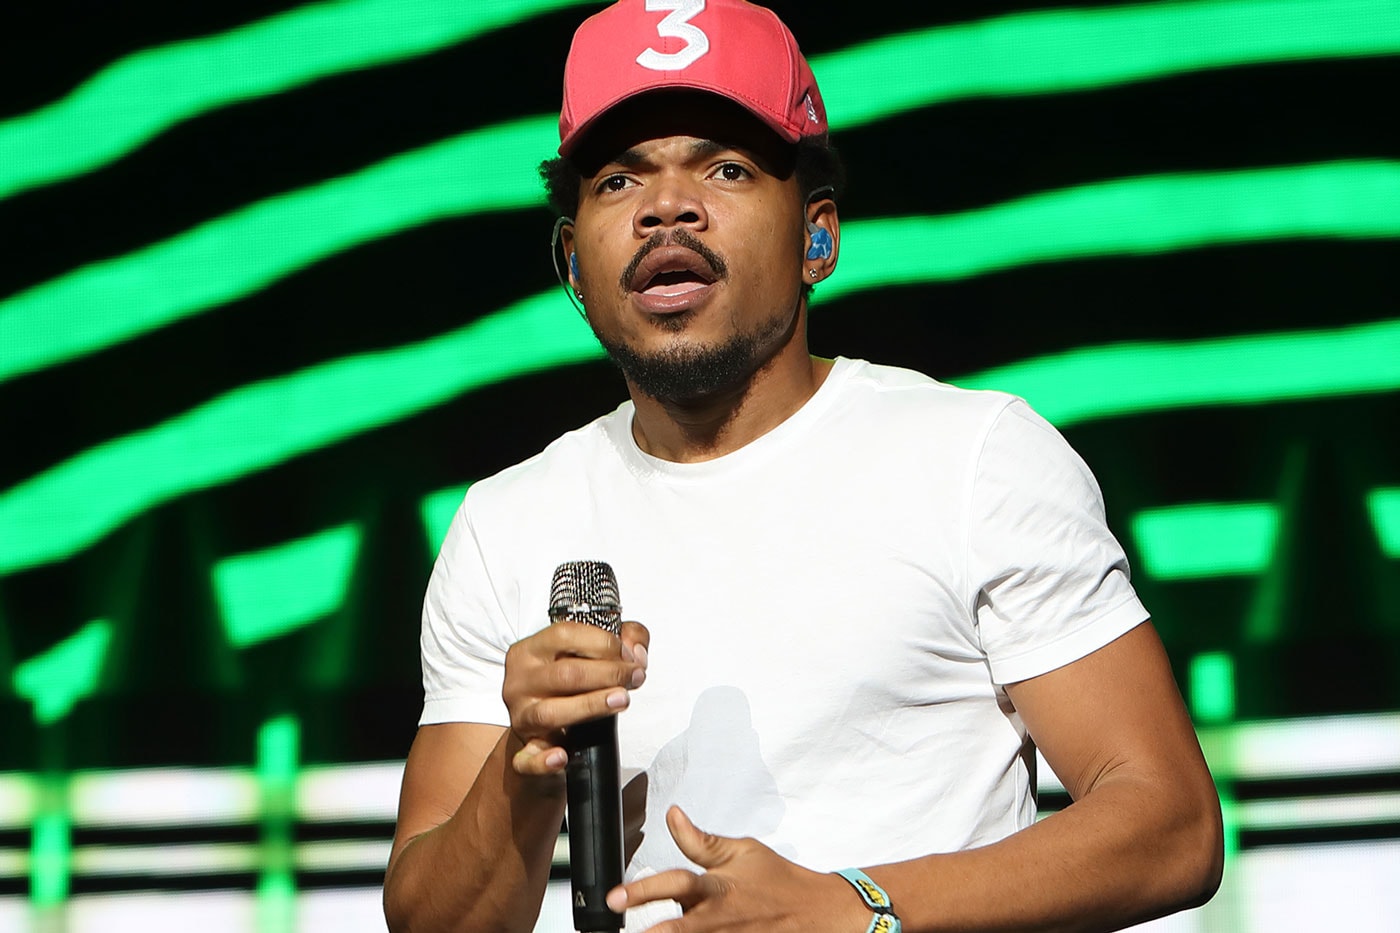 Hear Chance The Rapper Play His Favorite Christmas Songs Huw Stephens BBC Radio 1